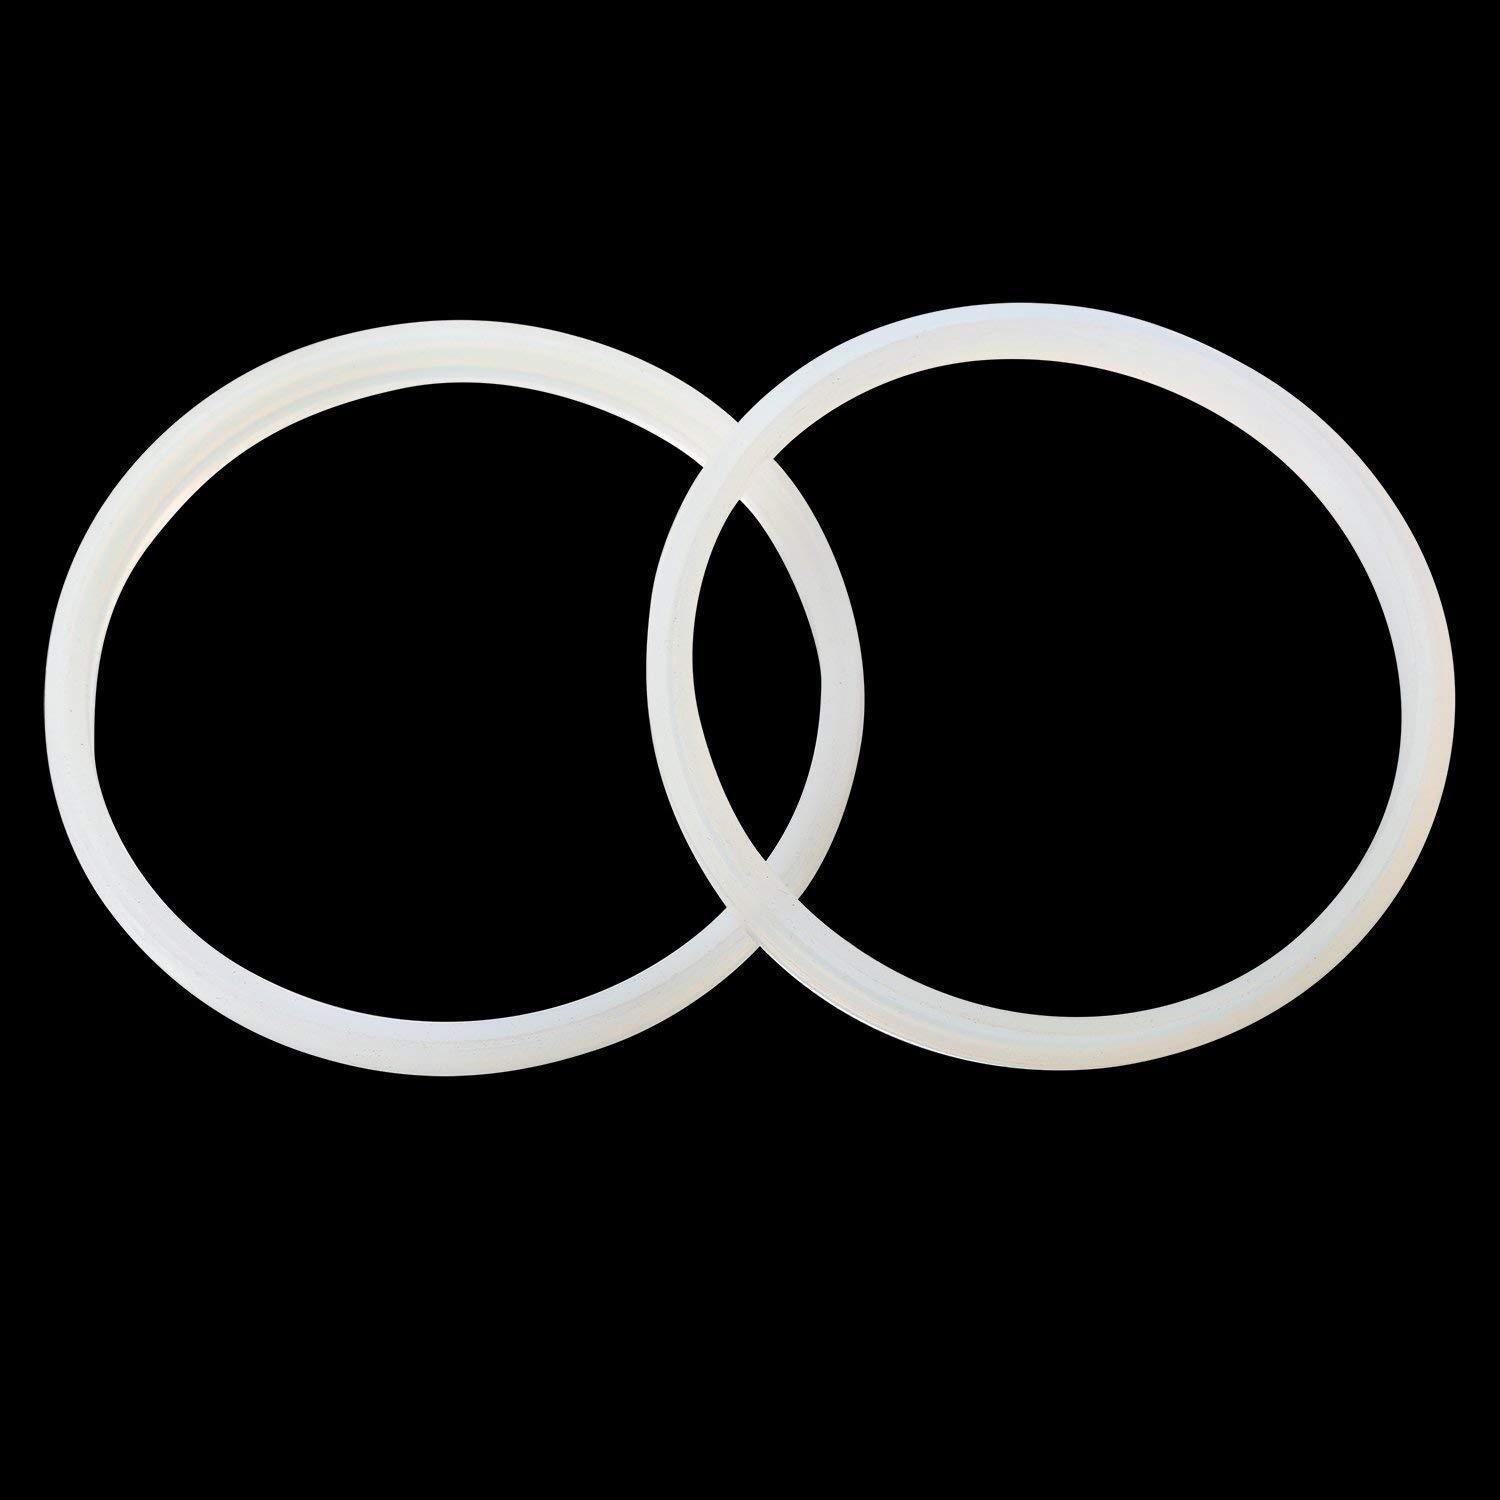 TWO PACK Rubber Gasket Seal for VIVO Manual Sausage Stuffer 3, 5,7, 11 lb